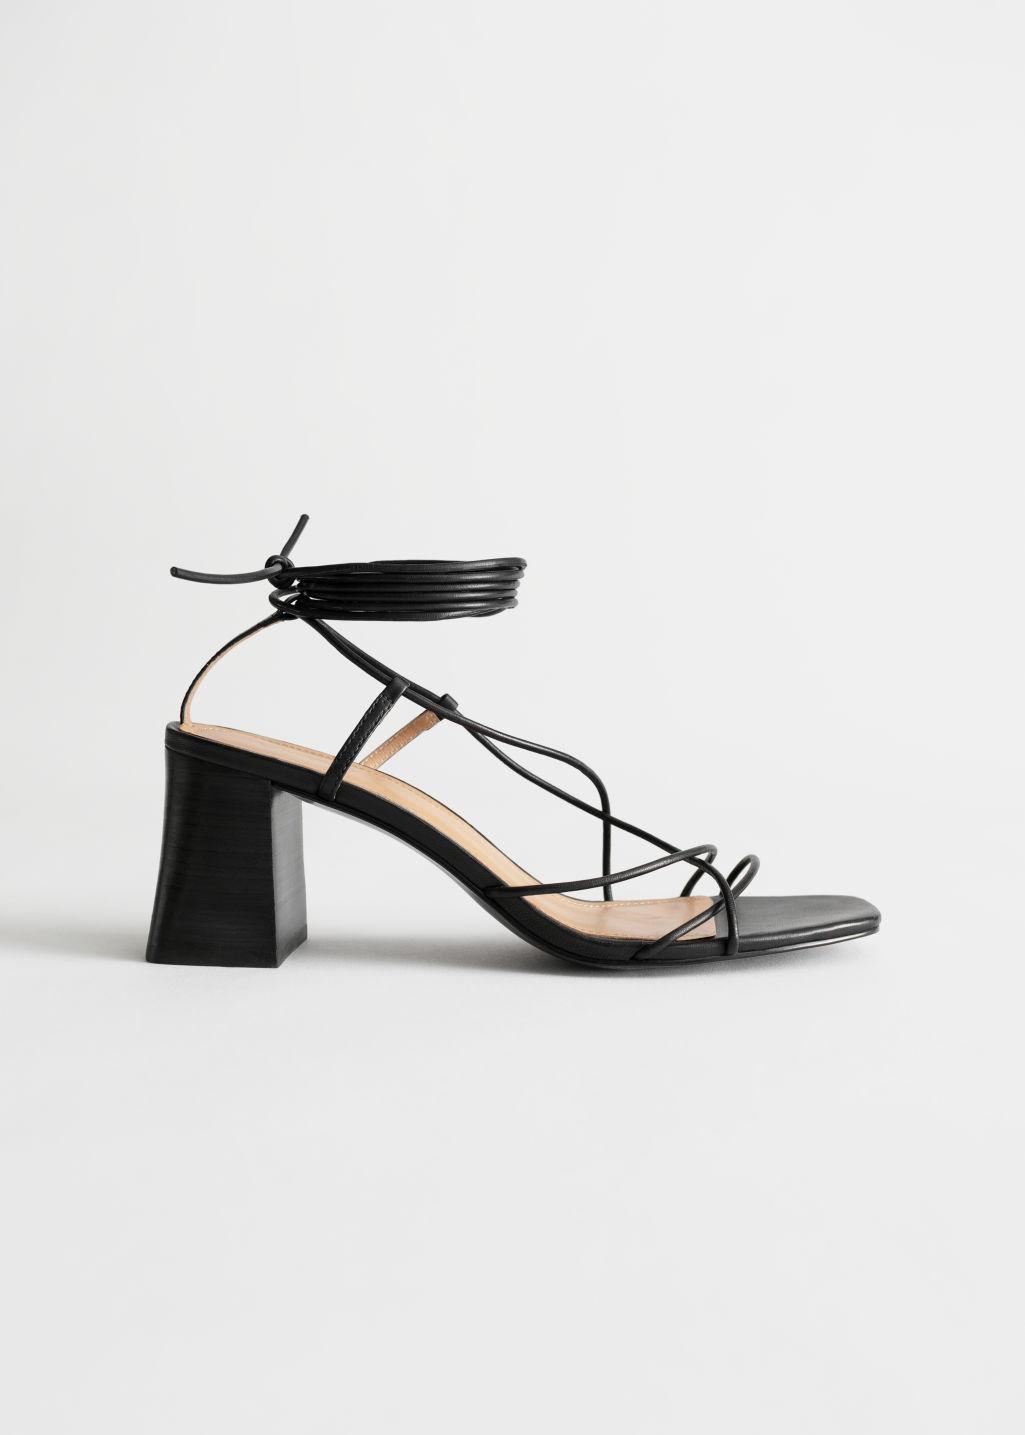 & Other Stories Leather Strappy Lace Up Heeled Sandals in Black - Lyst